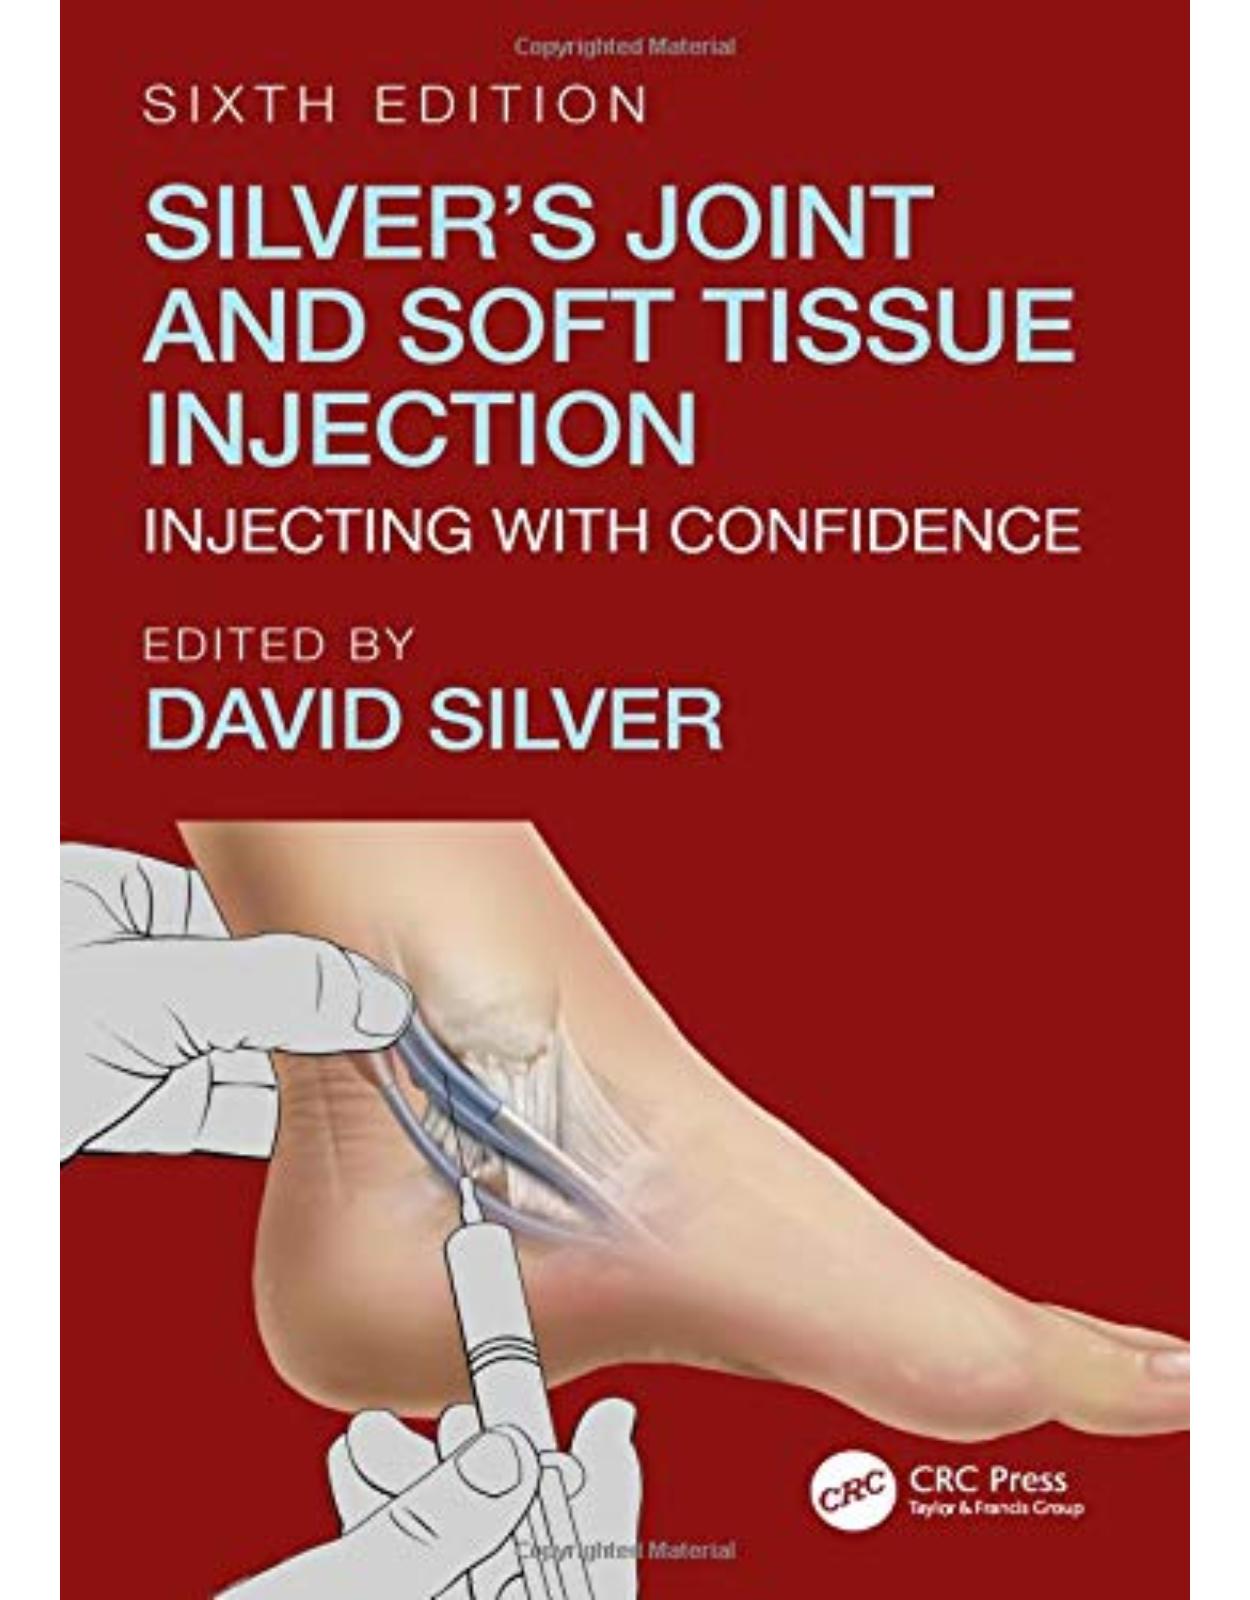 Silver’s Joint and Soft Tissue Injection: Injecting with Confidence, Sixth Edition